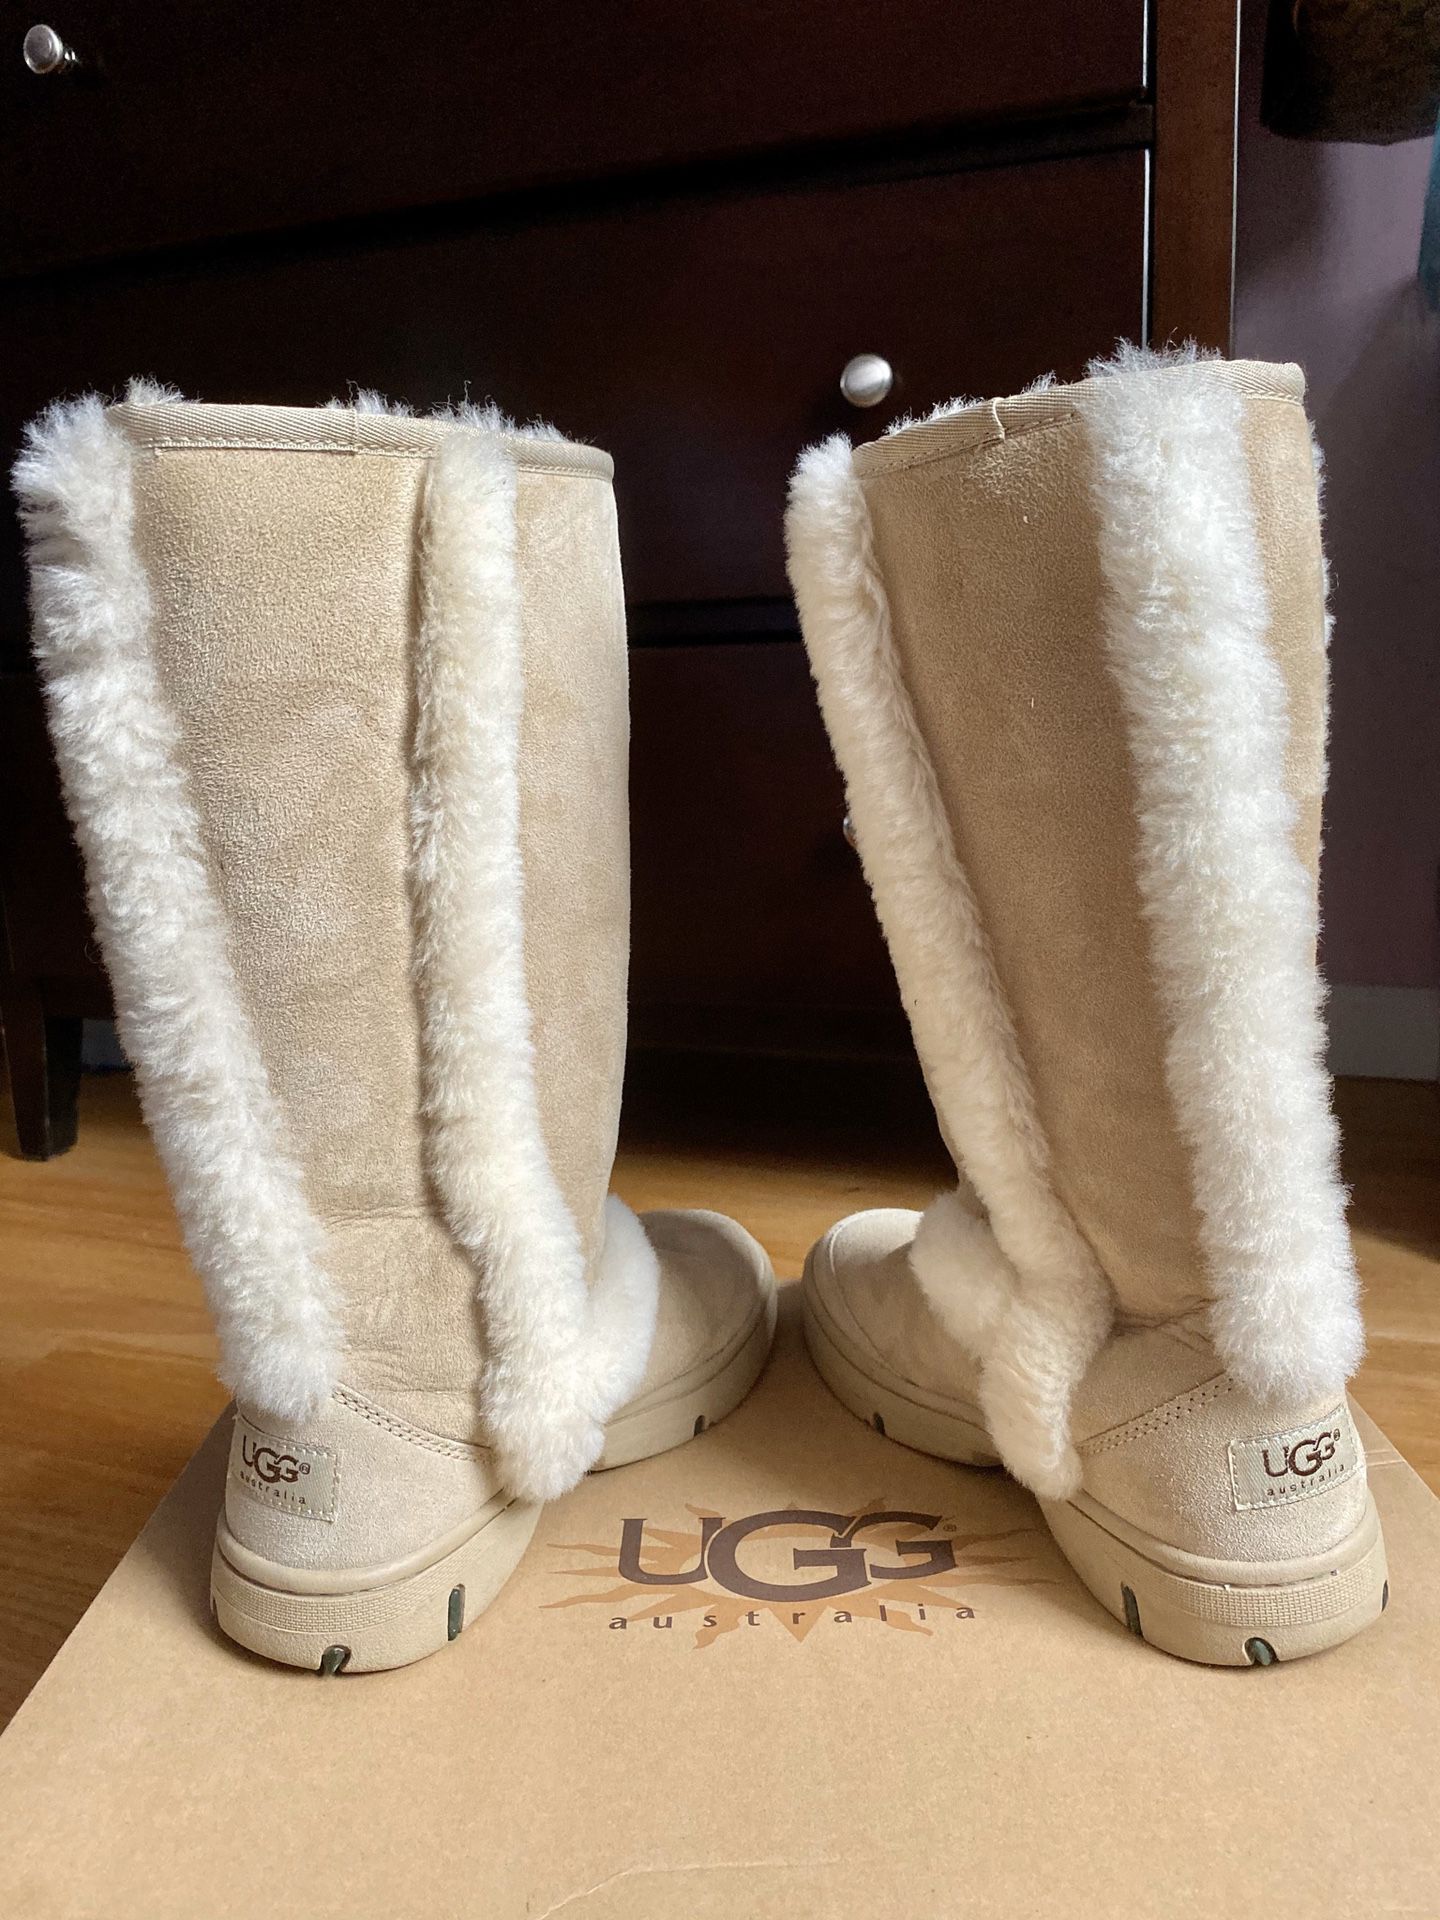 Womens Ugg Boots